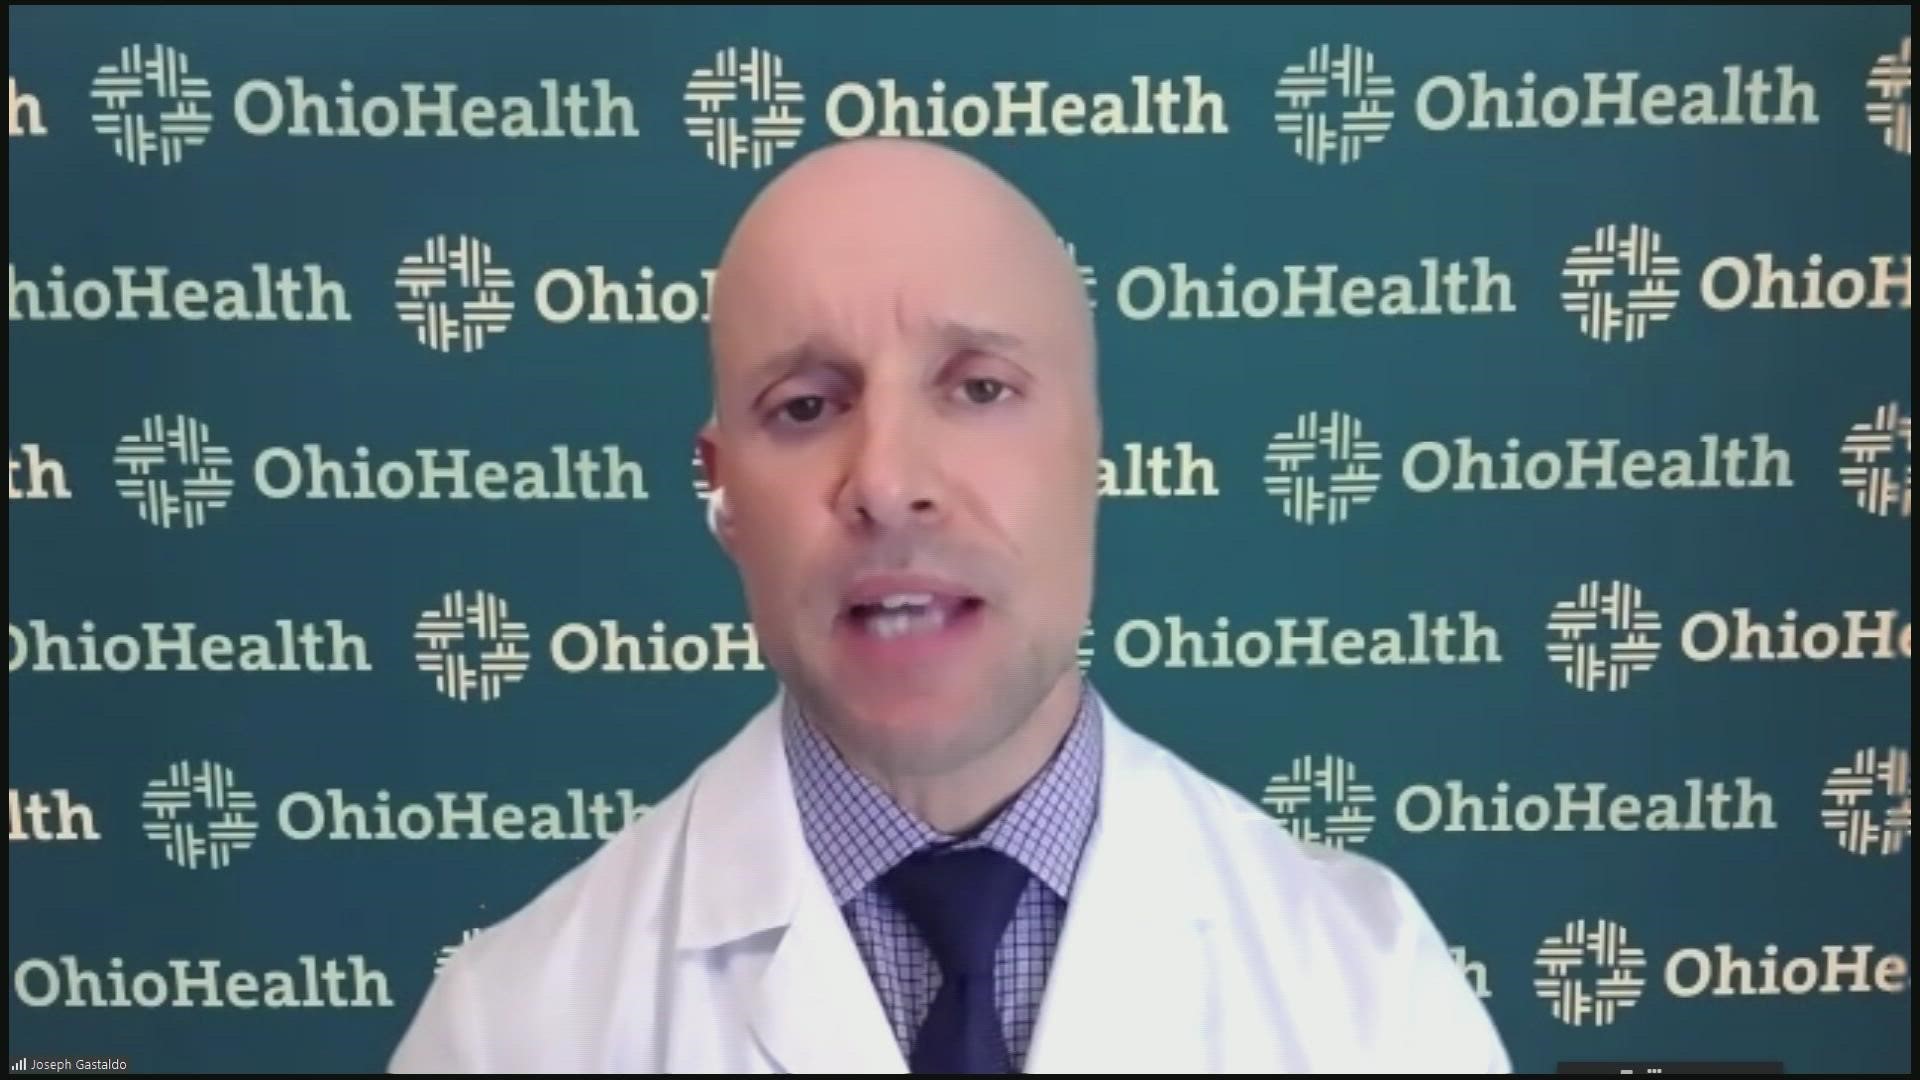 OhioHealth's Dr. Joseph Gastaldo said the pandemic is still happening, but the emergency phase of it is over.